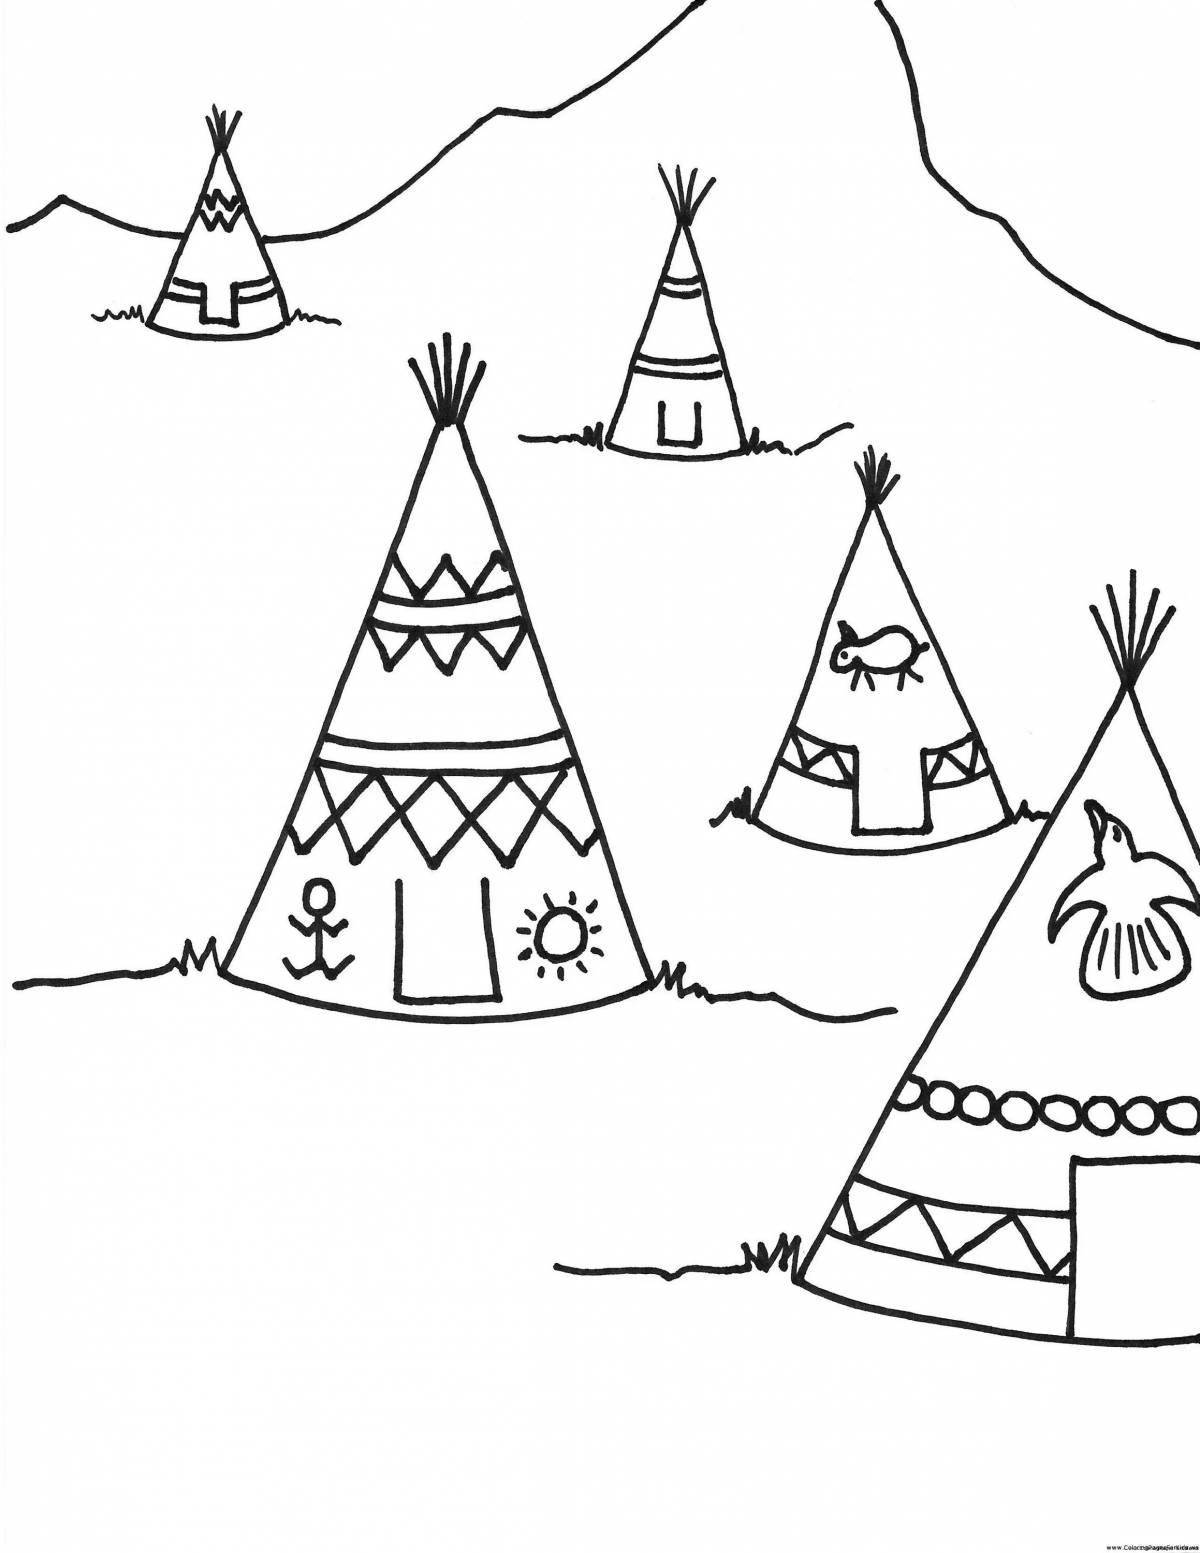 Coloring page charming wigwam